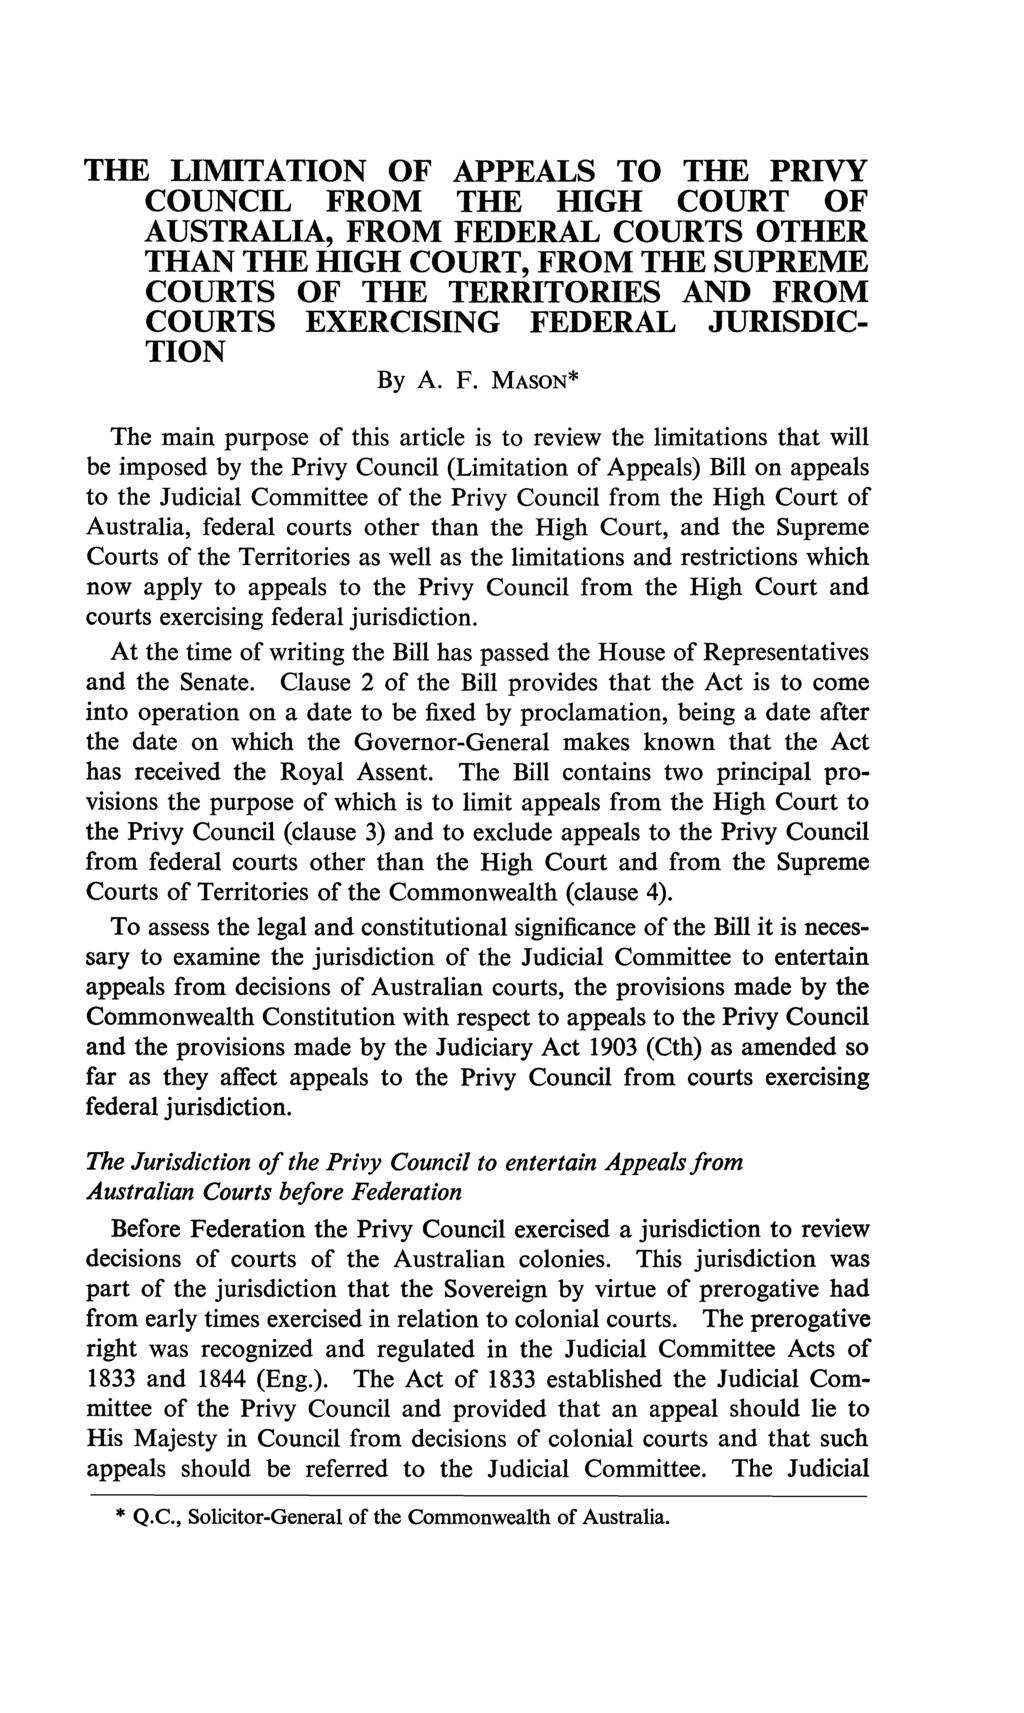 THE LIMITATION OF APPEALS TO THE PRIVY COUNCIL FROM THE HIGH COURT OF AUSTRALIA, FROM FEDERAL COURTS OTHER THAN THE HIGH COURT, FROM THE SUPREME COURTS OF THE TERRITORIES AND FROM COURTS EXERCISING